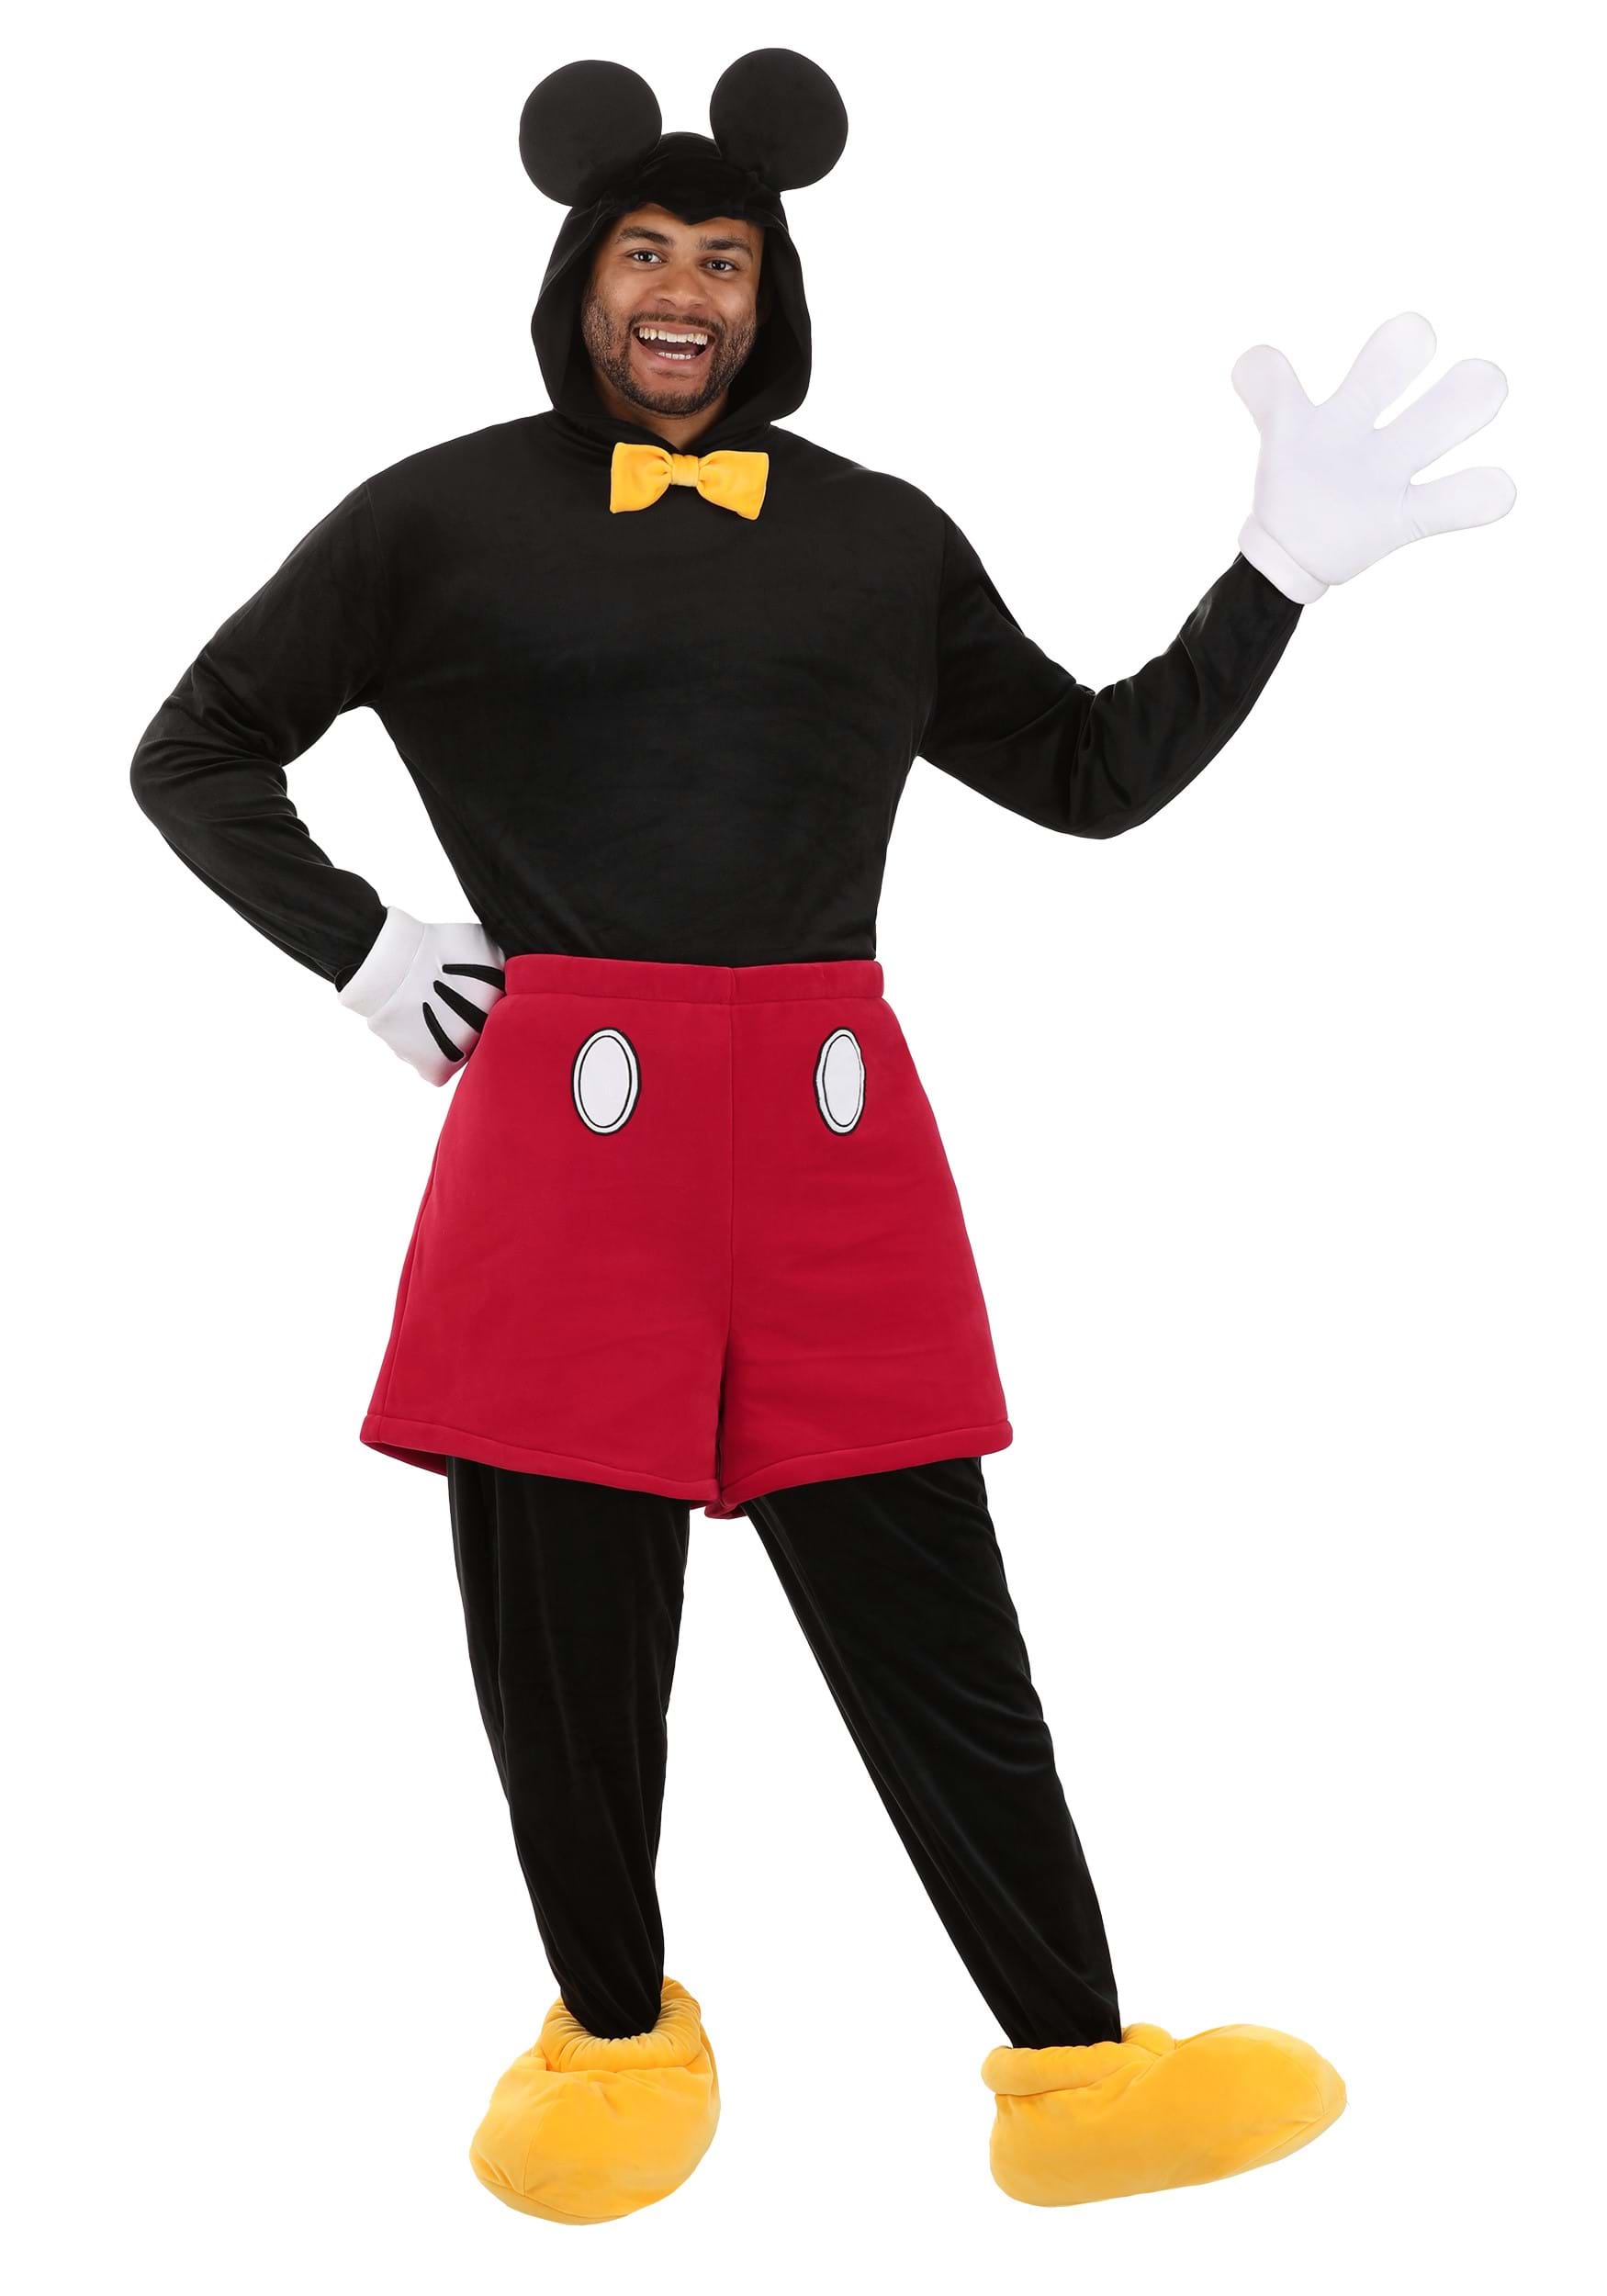 https://images.fun.com/products/74862/2-1-281509/adult-deluxe-mickey-mouse-costume-alt-13.jpg